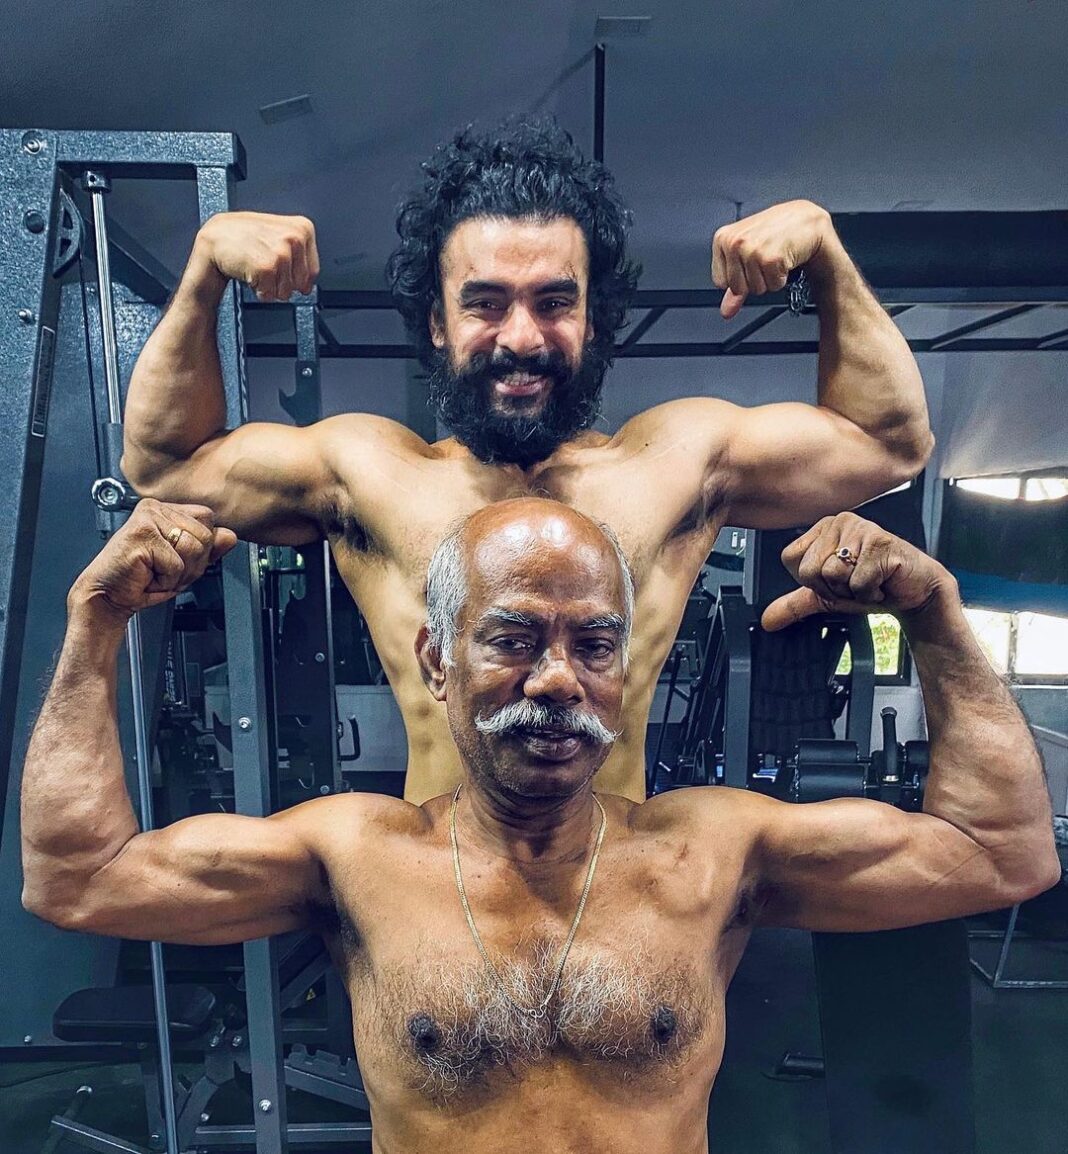 Tovino Thomas Instagram - My dad. Guide. Advisor. Motivator. Decision maker. And workout partner. #fathergoals The extra muscle on his left upper chest is a pacemaker fixed in 2016, but since then he has been into fitness more than ever! #fatherscores Irinjalakuda